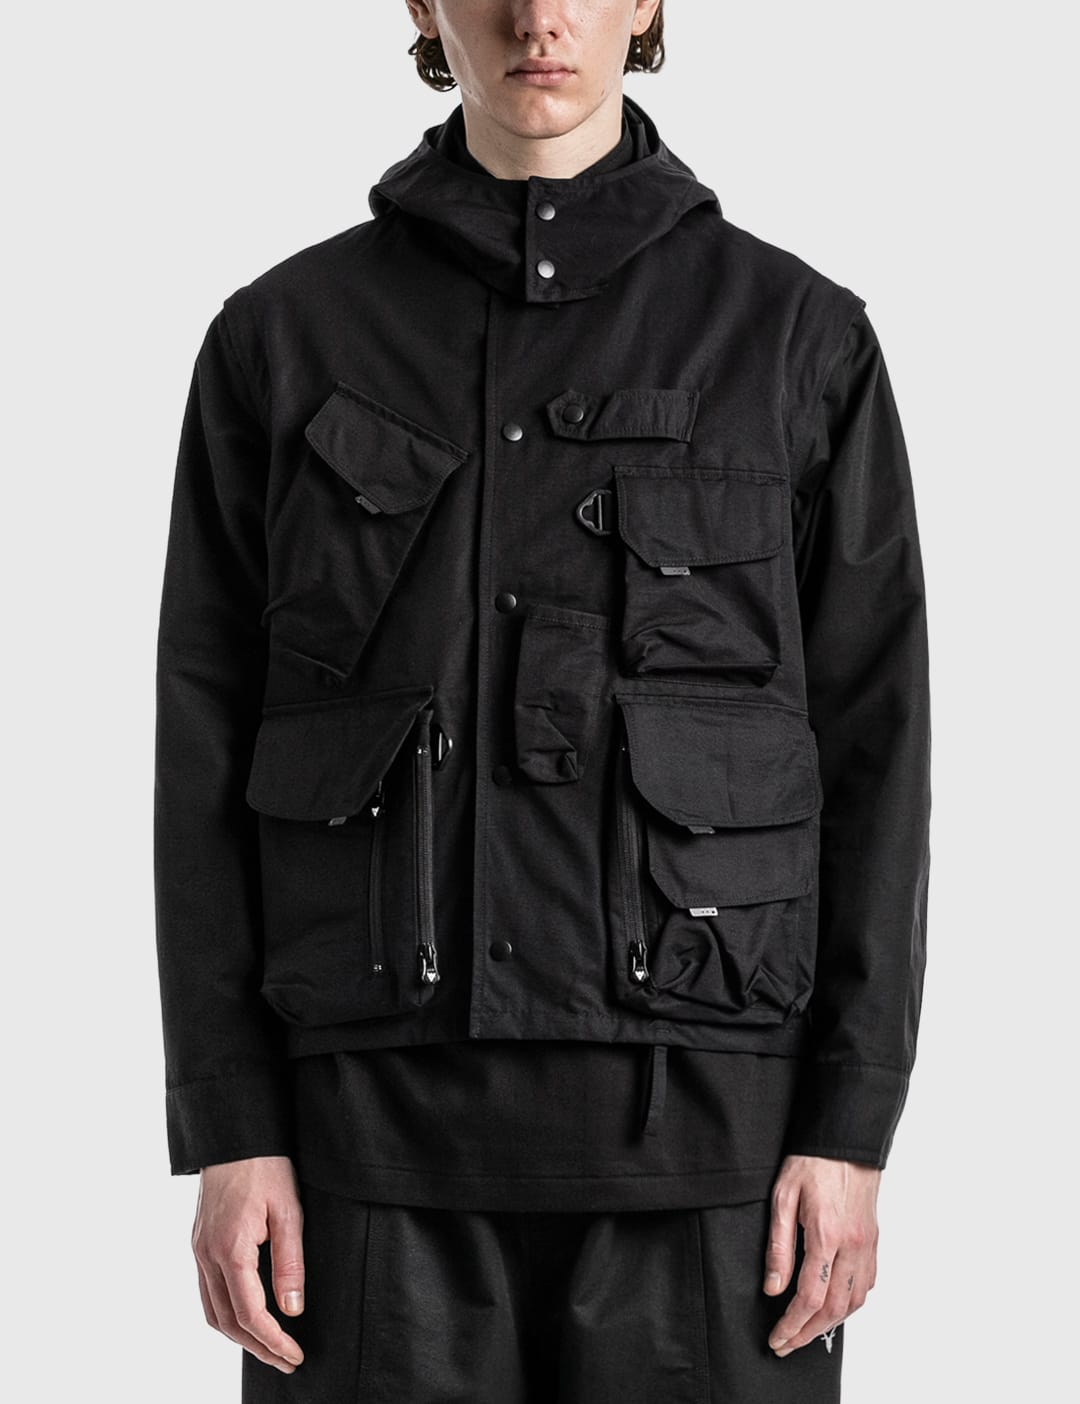 South2 West8 - Tenkara Trout Parka | HBX - Globally Curated